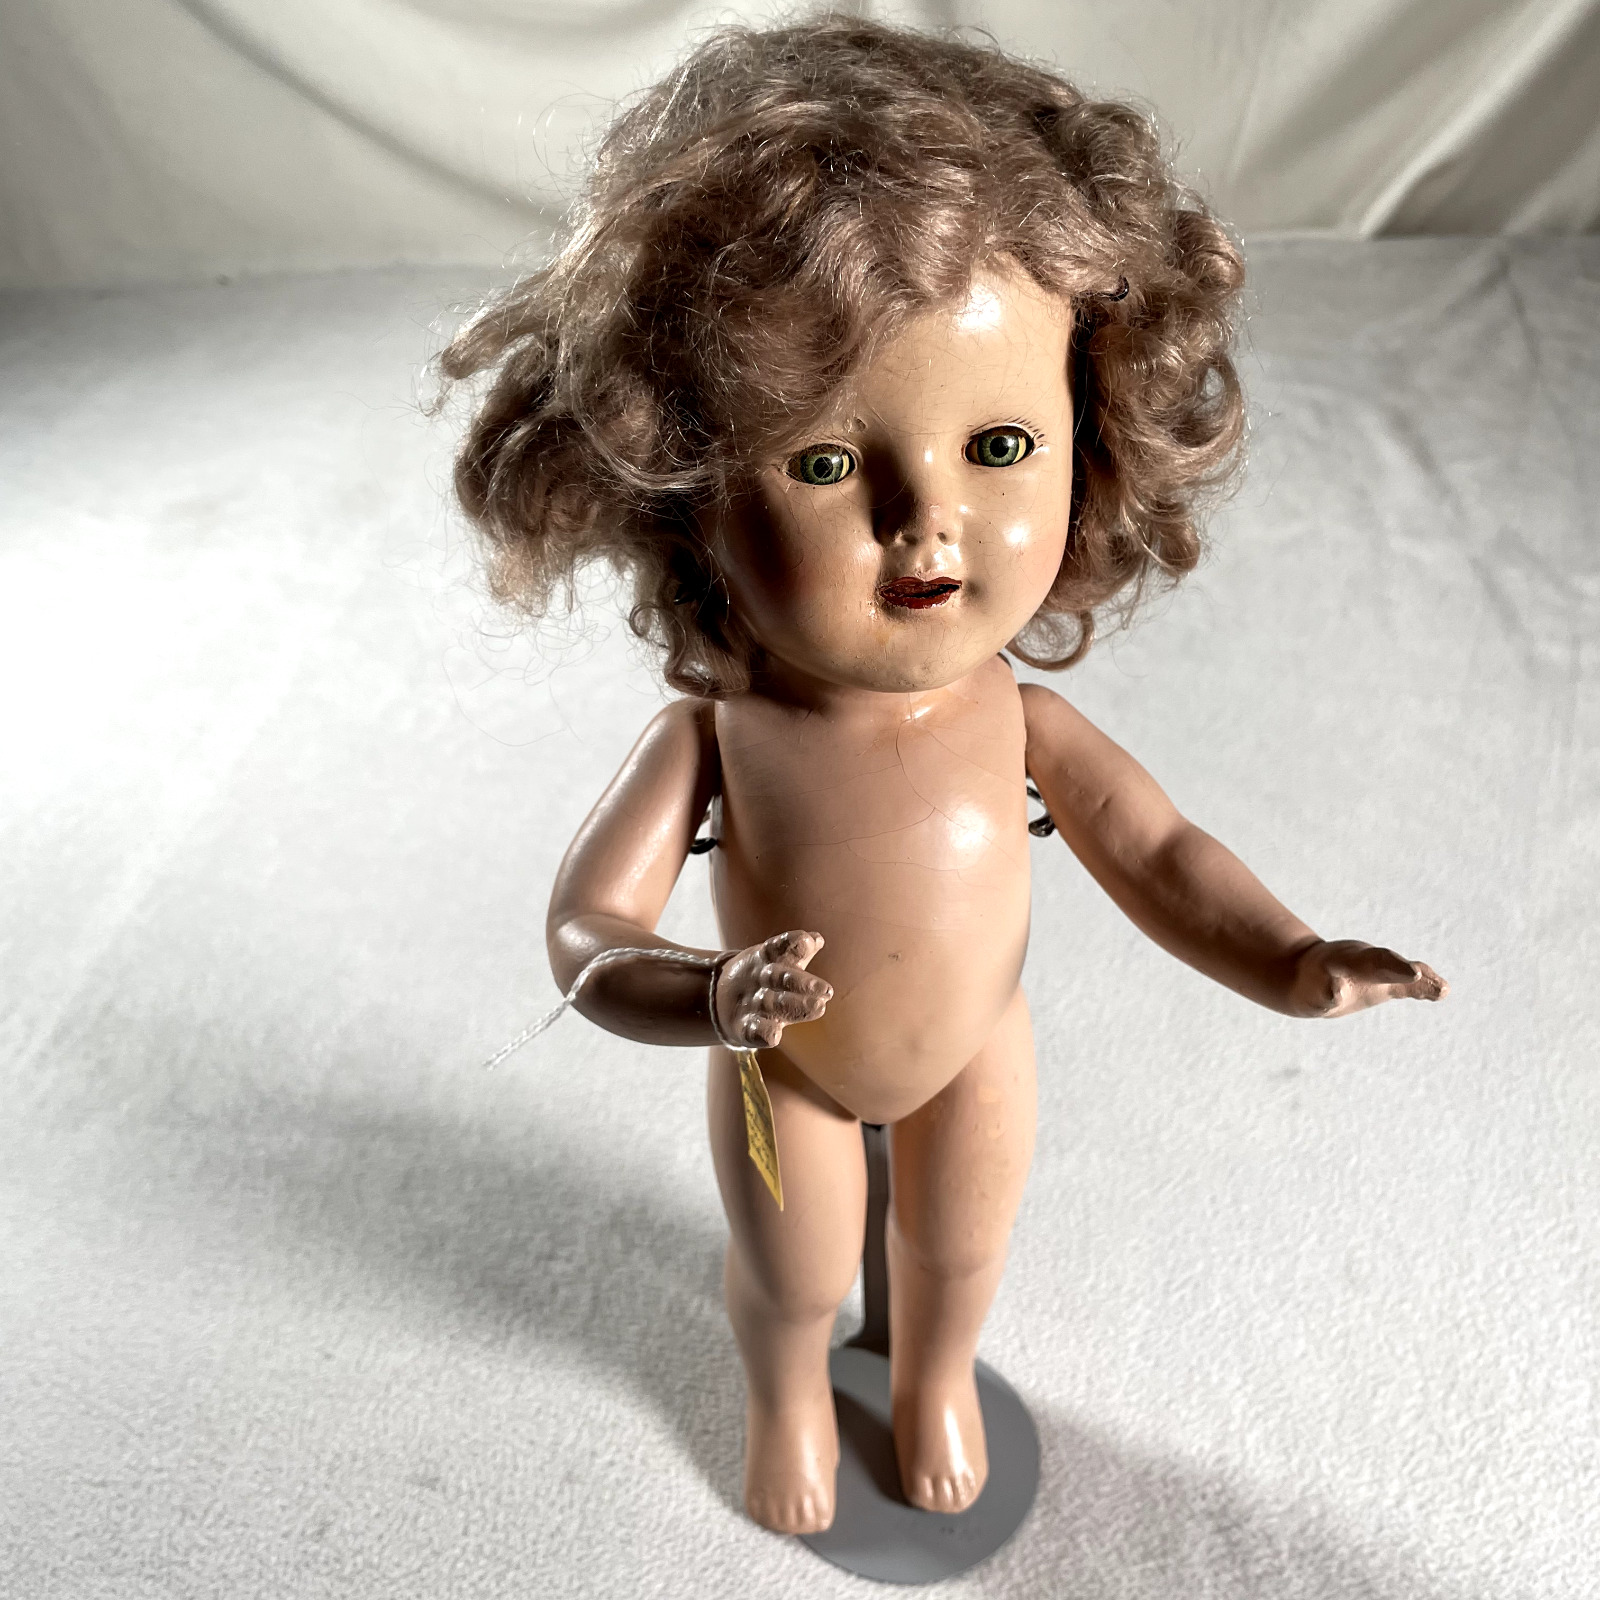 Vintage Kewty Doll 1930s Arranbee 14 Inch Composition Doll Hair Shirley Style